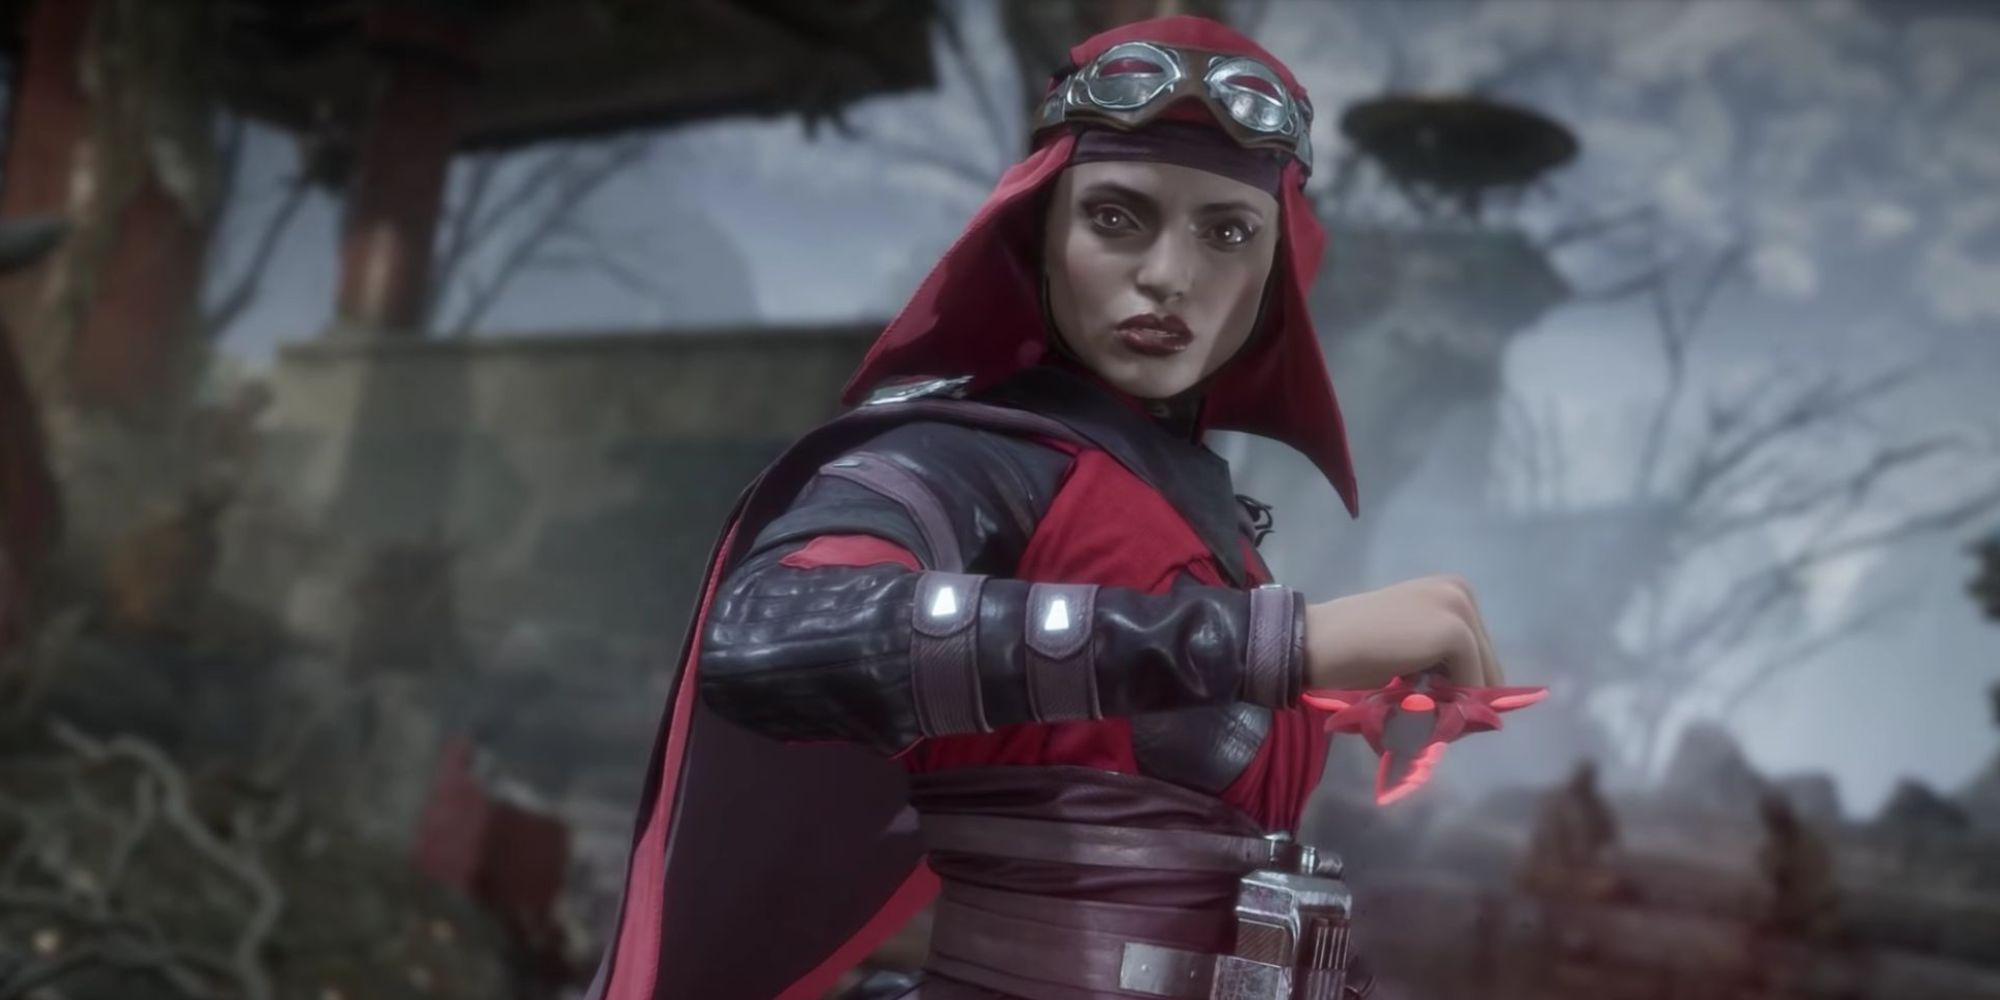 Skarlet readying her knife during her character introduction in Mortal Kombat 11